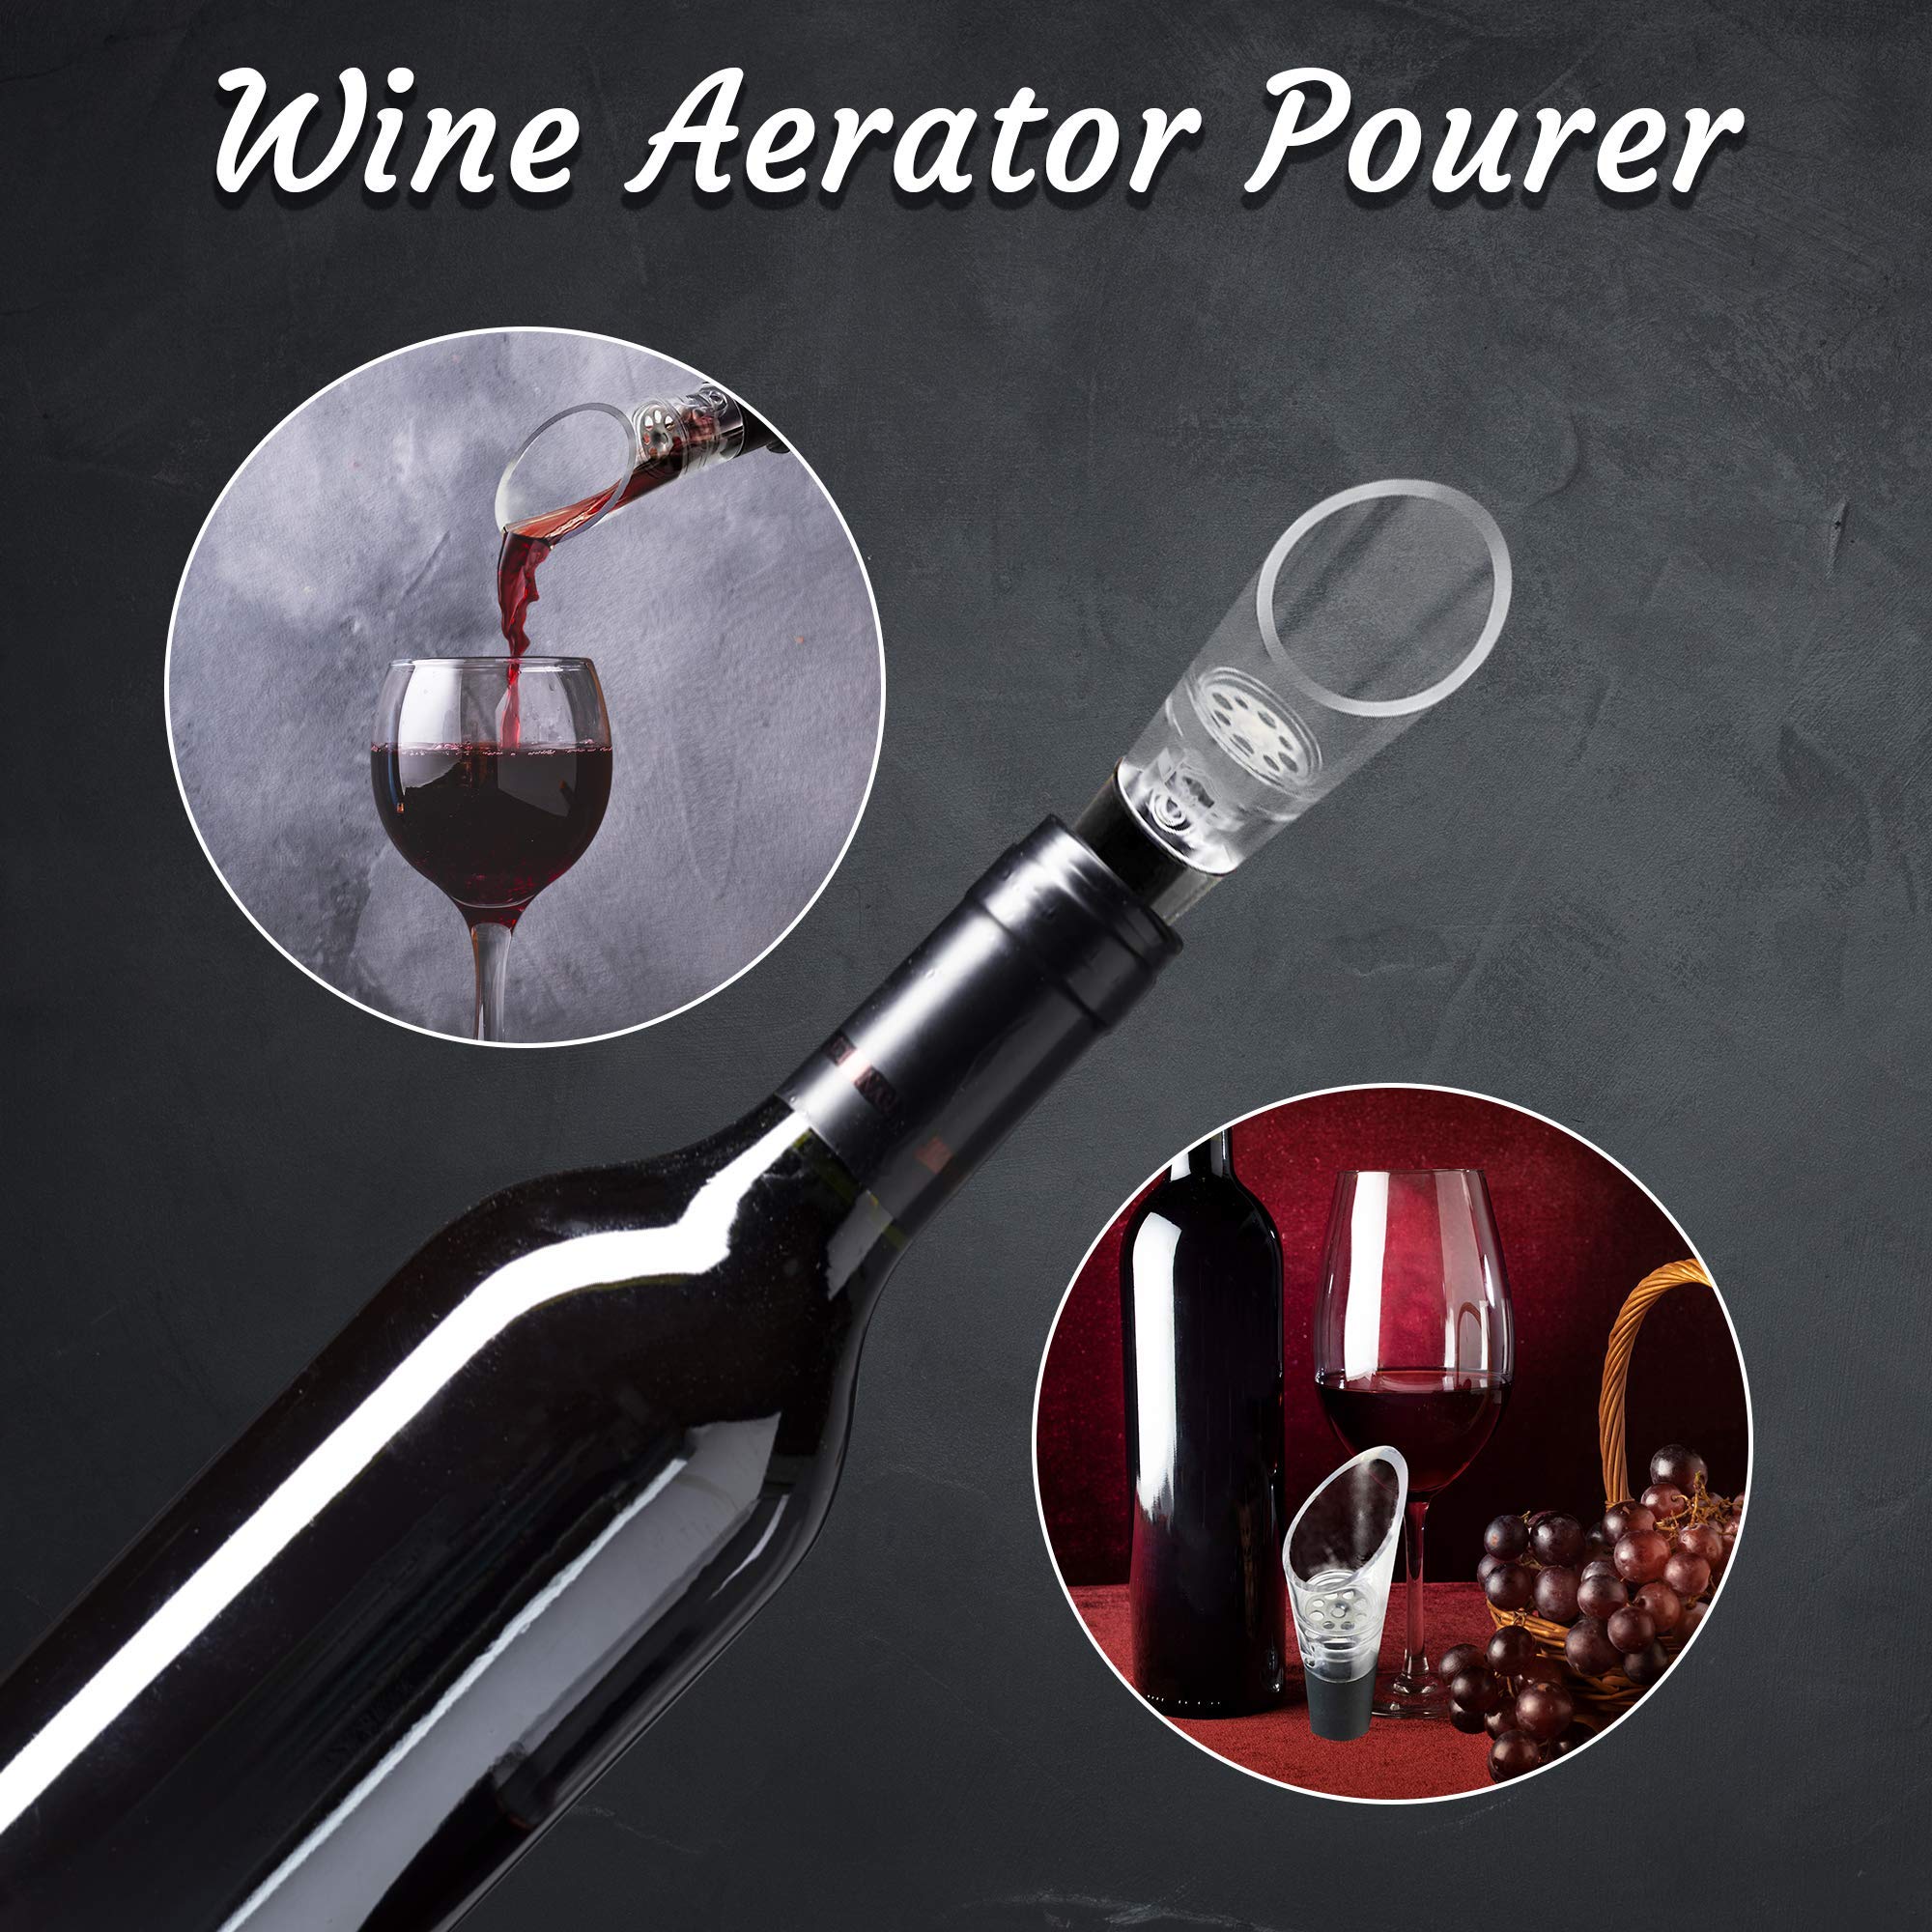 Trovety Aerators For Wine – 2-in-1 Diffuser Oxygenator and Pouring Dispenser for Enhanced Smoother Flavors of Red Wines – Robust Acrylic Plastic and Silicone Rubber Aeration Breather (1)